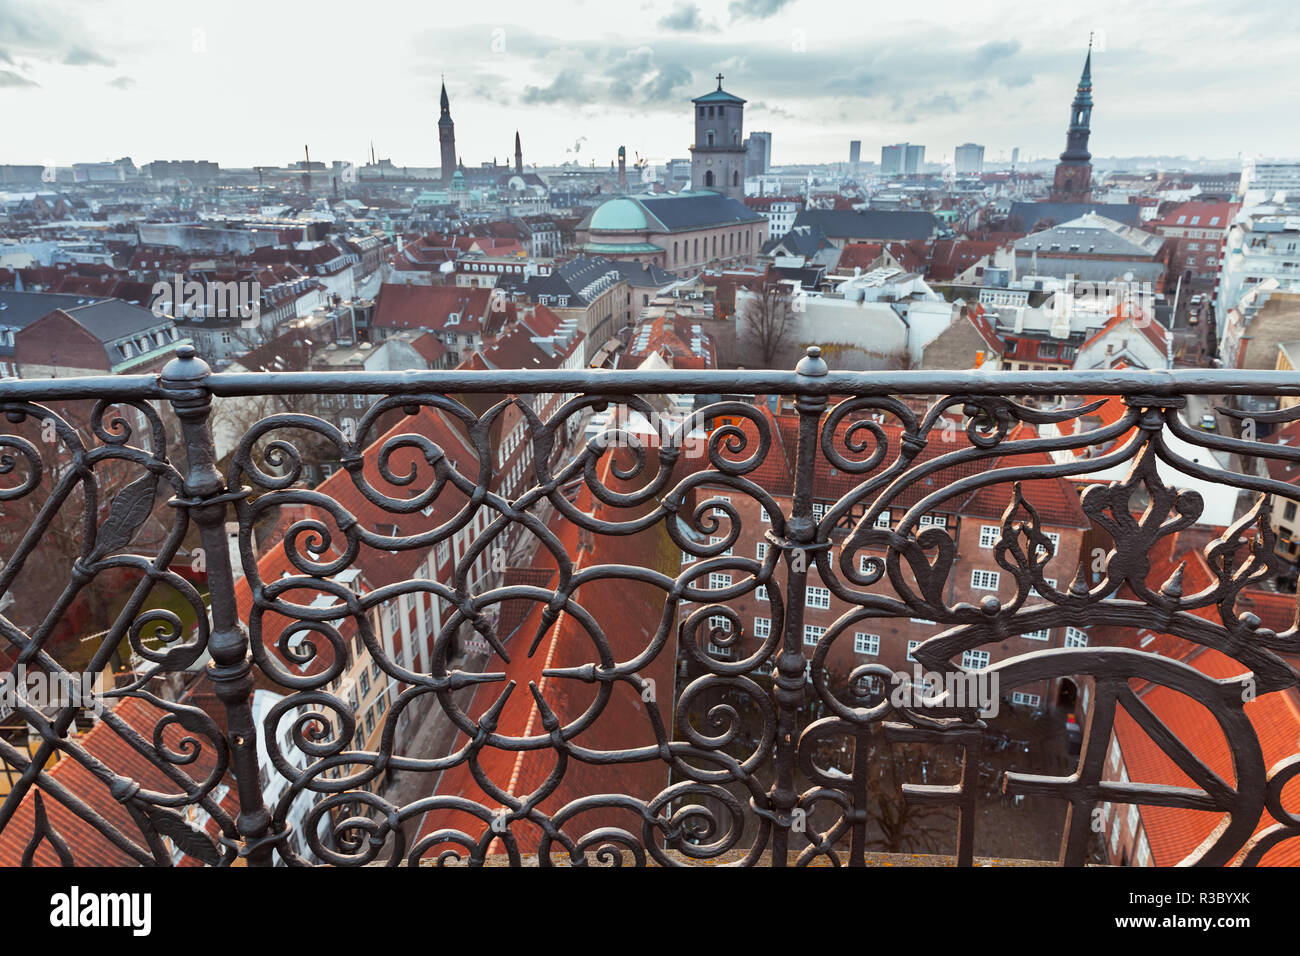 Skyline of Copenhagen, Denmark with decorative fence, photo taken from The Round Tower, popular old city landmark and viewpoint Stock Photo